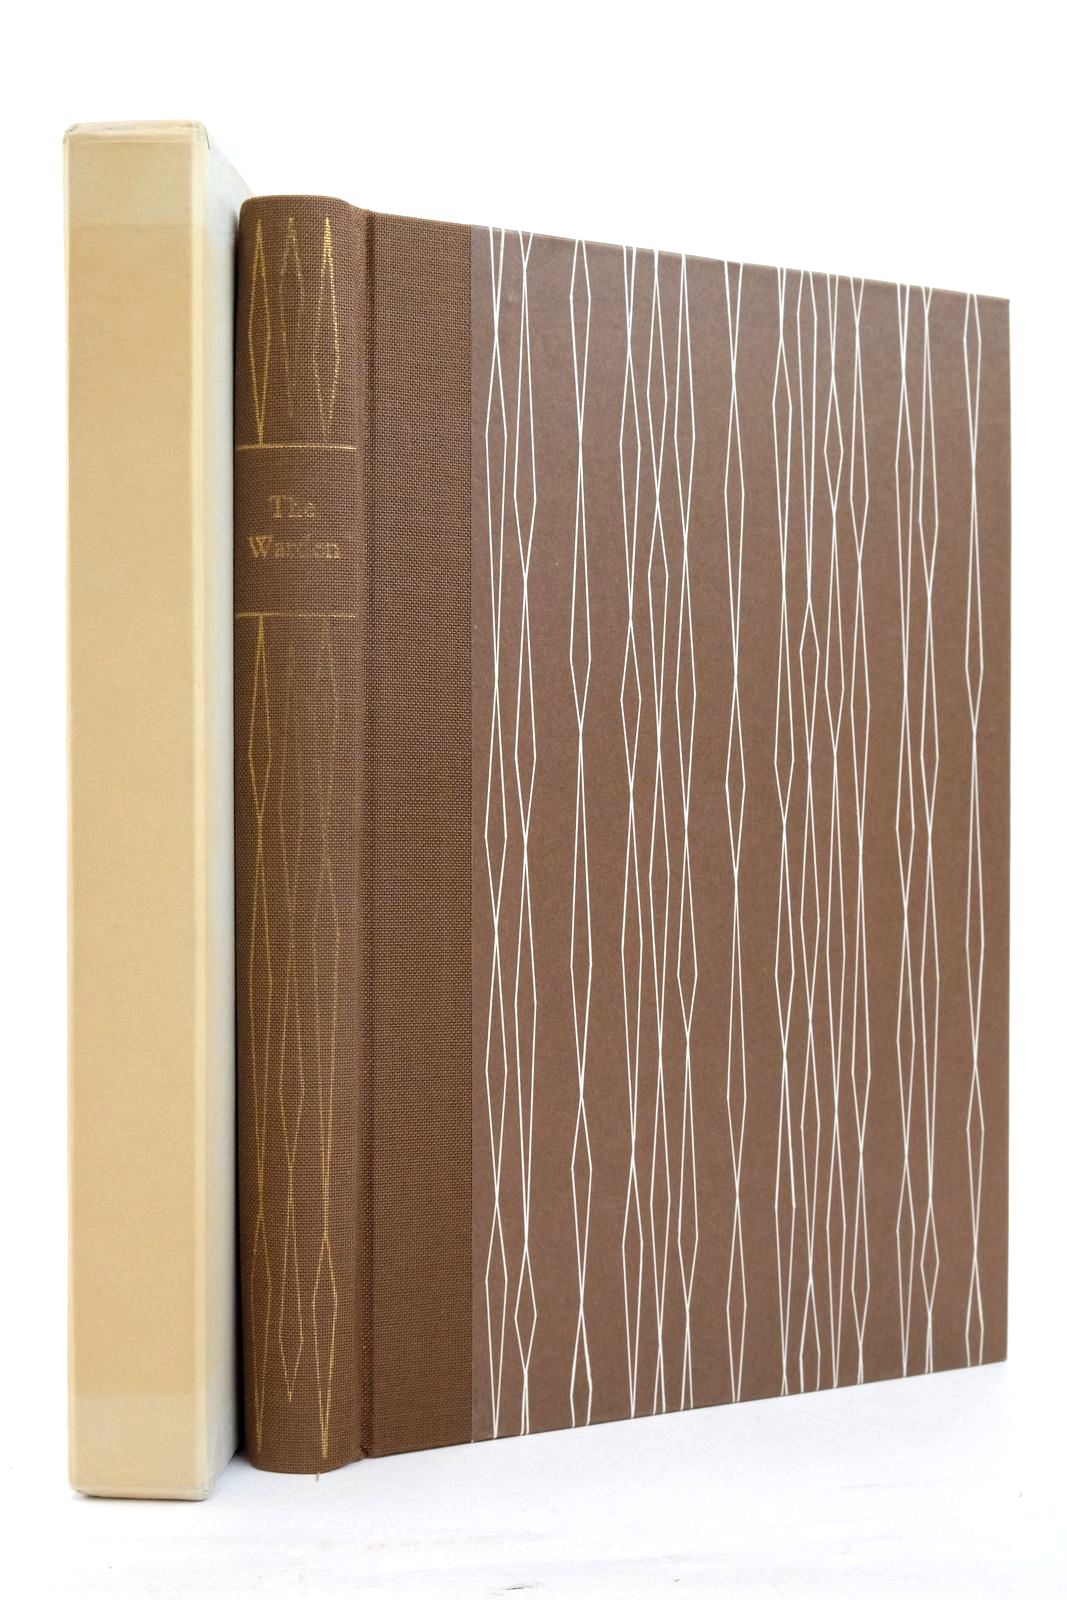 Photo of THE WARDEN written by Trollope, Anthony illustrated by Reddick, Peter published by Folio Society (STOCK CODE: 2138399)  for sale by Stella & Rose's Books